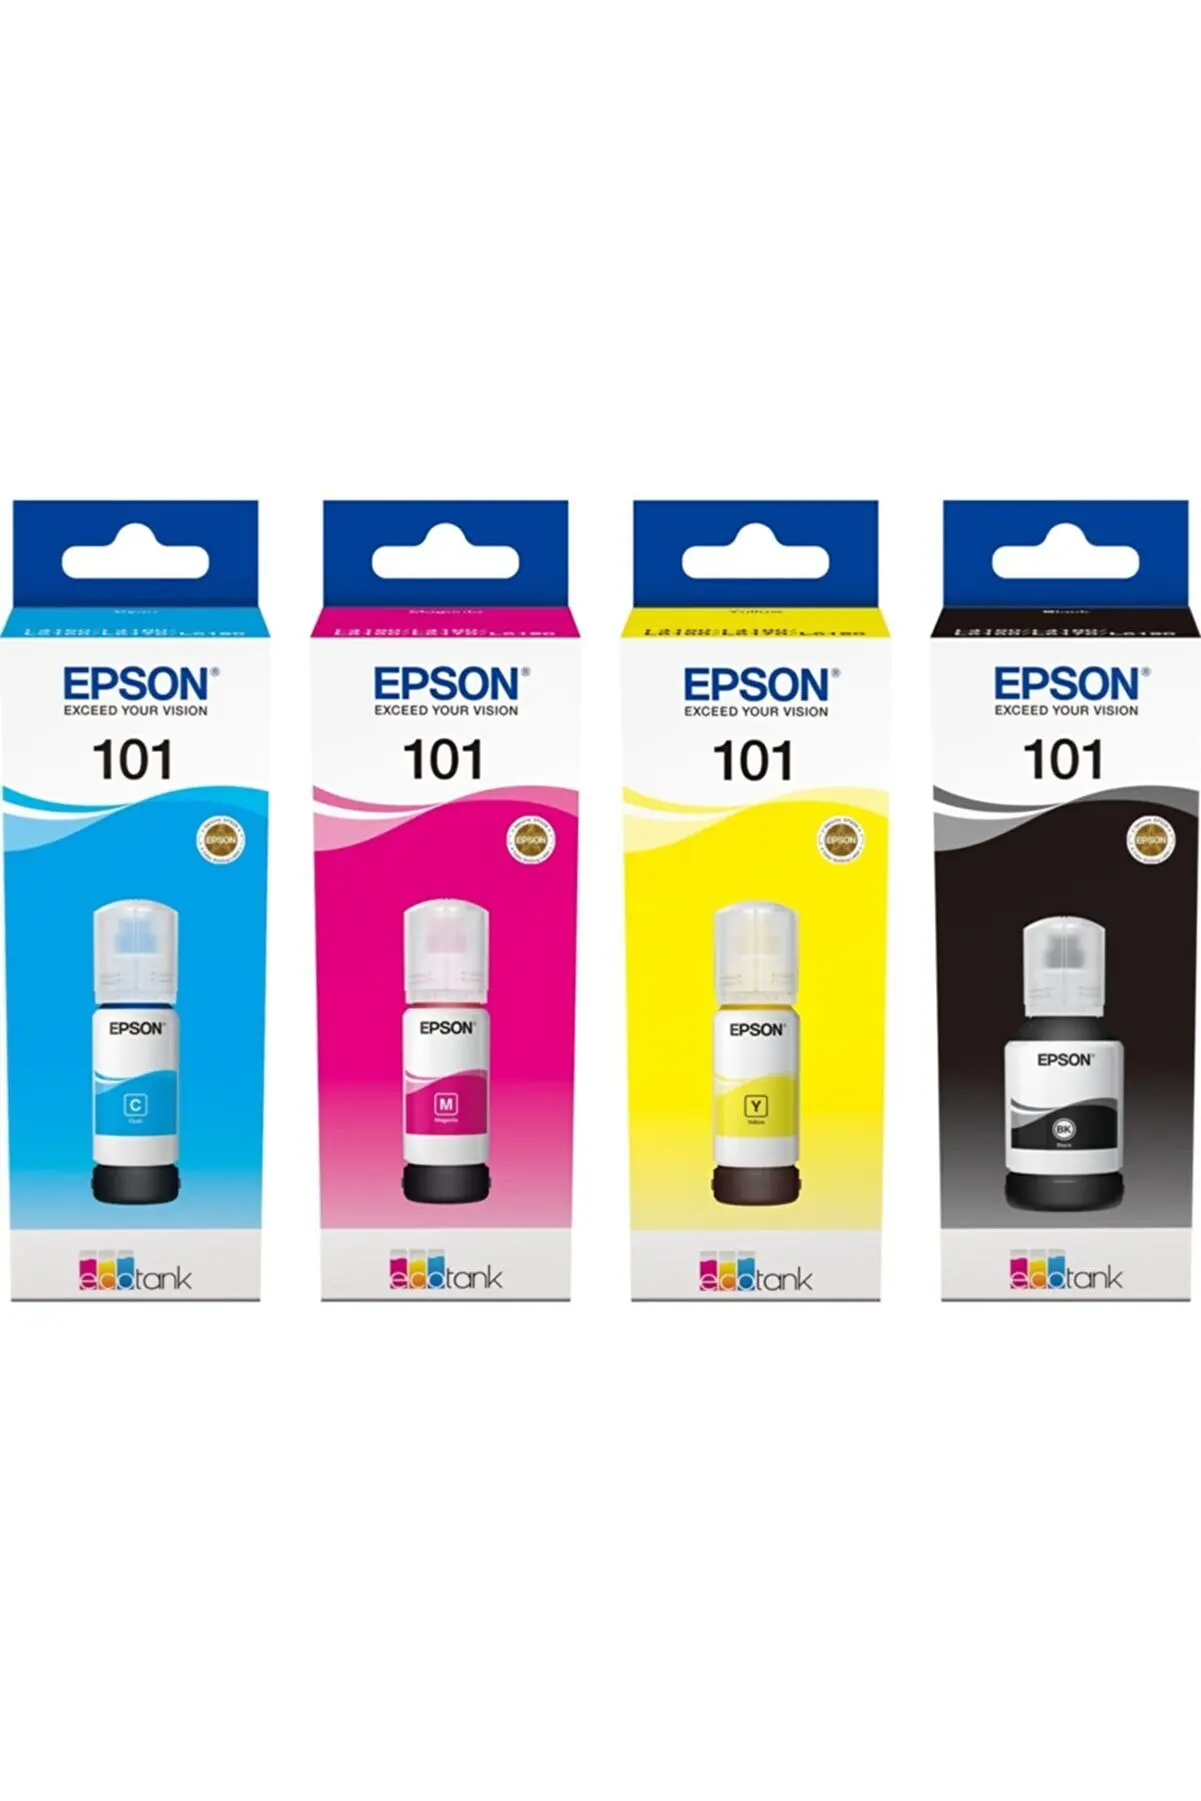 

Epson 101 Ecotank Ink Bottle Black Cyan Magenta Yellow Colors and All In One Advantageous Package